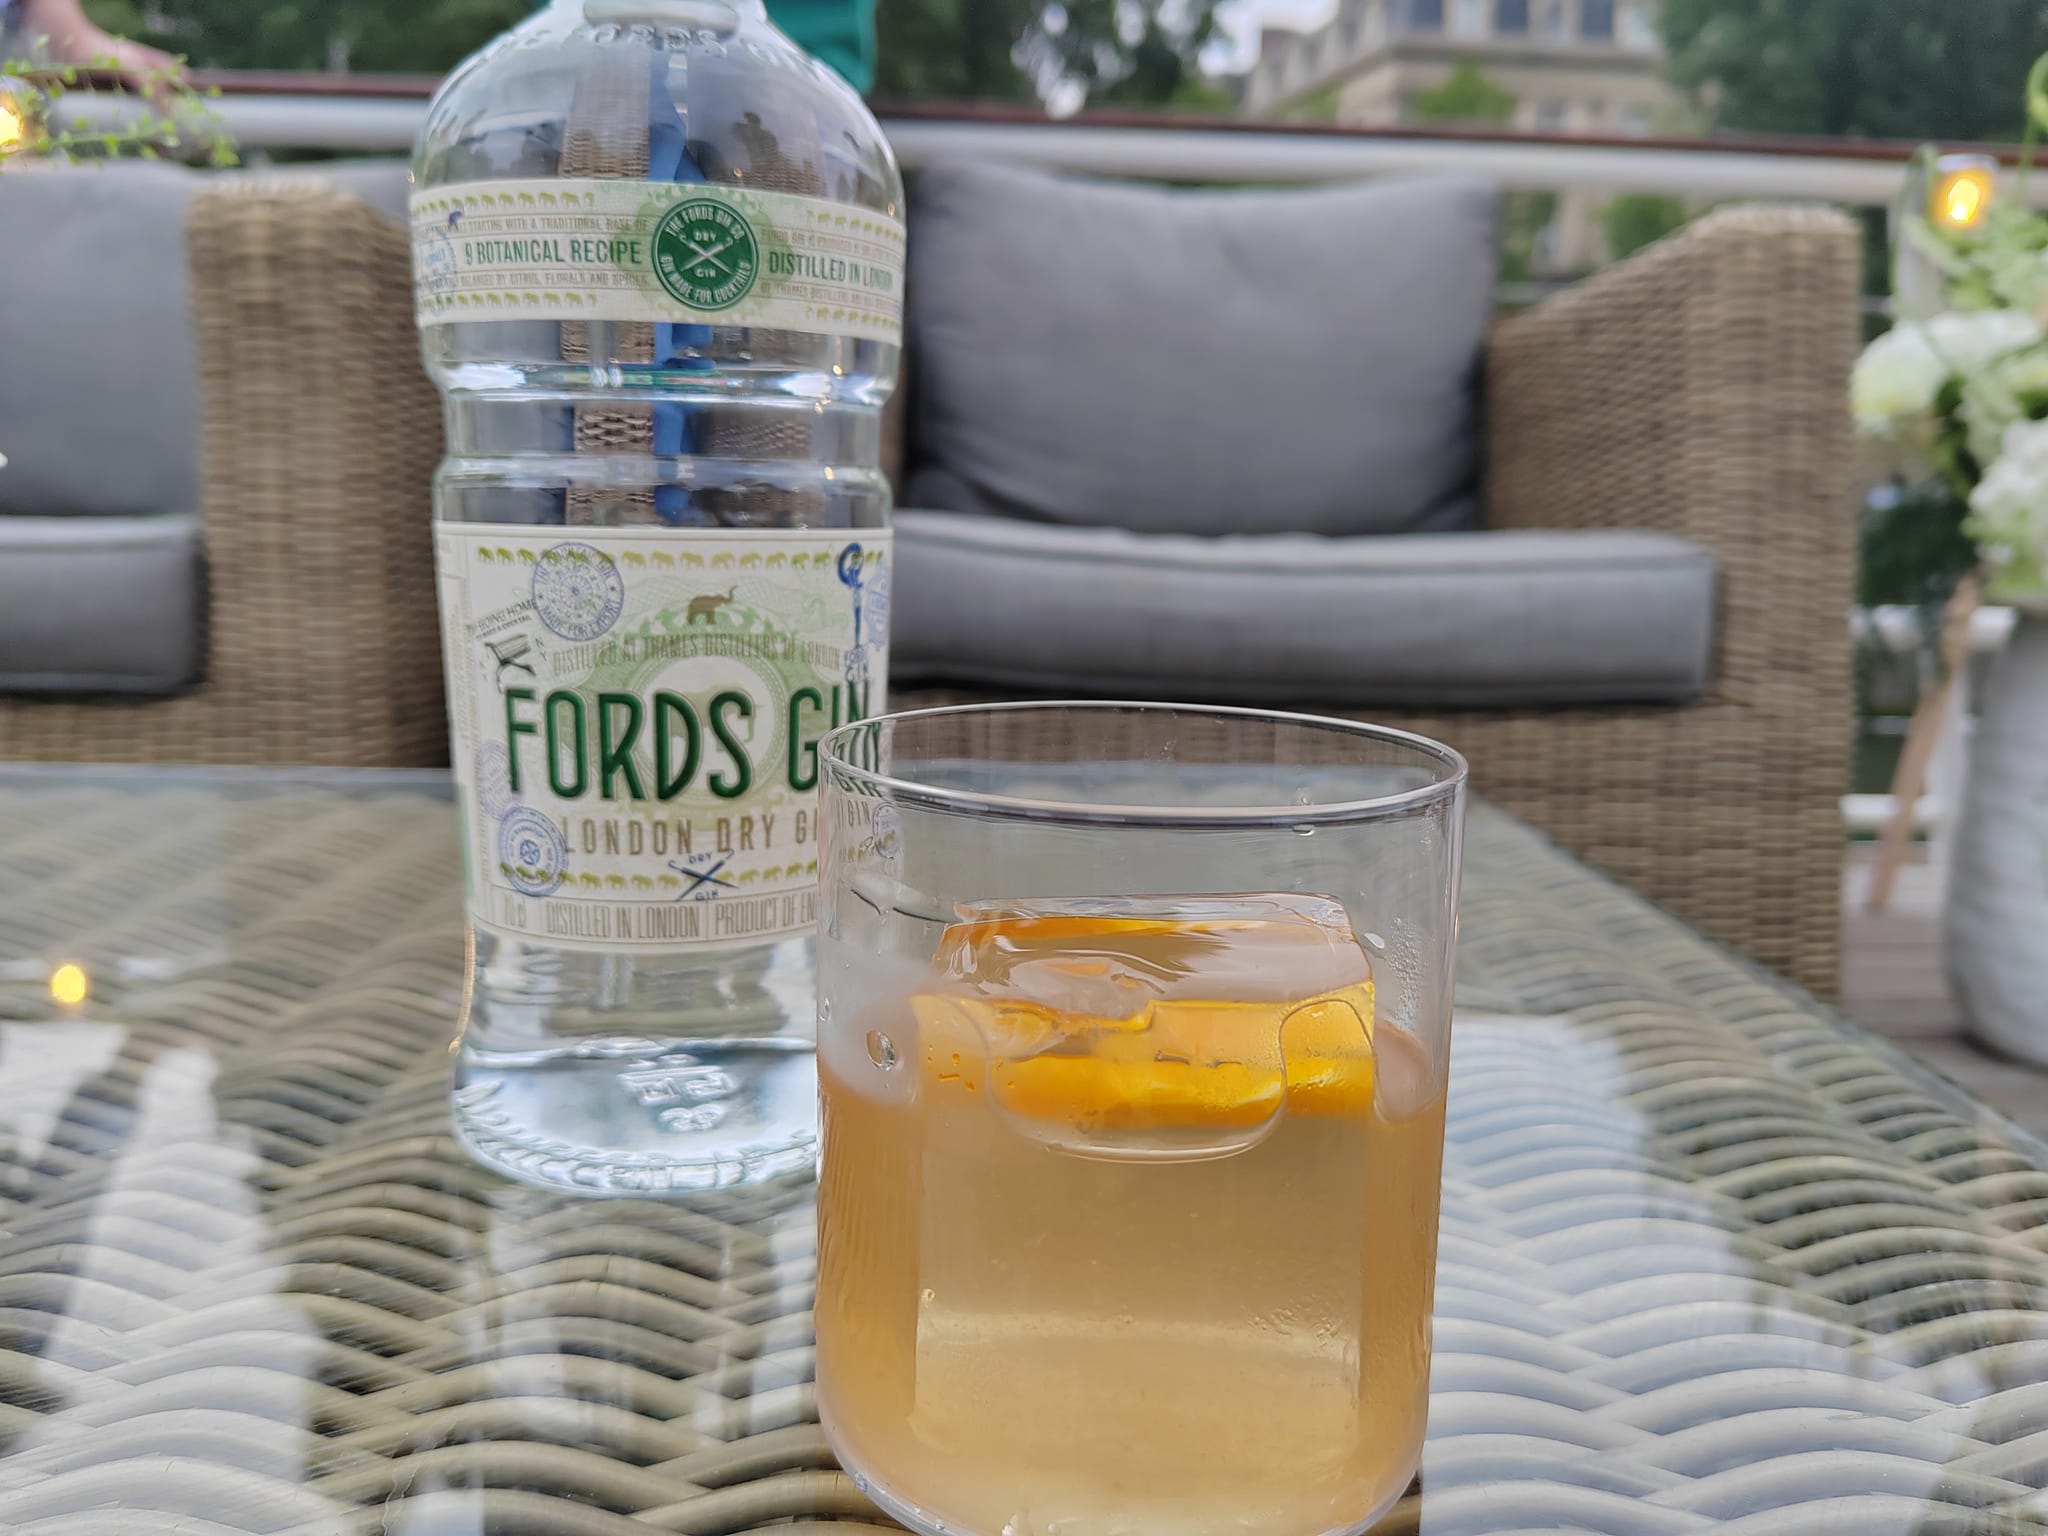 Dreaming Man - Fords Gin